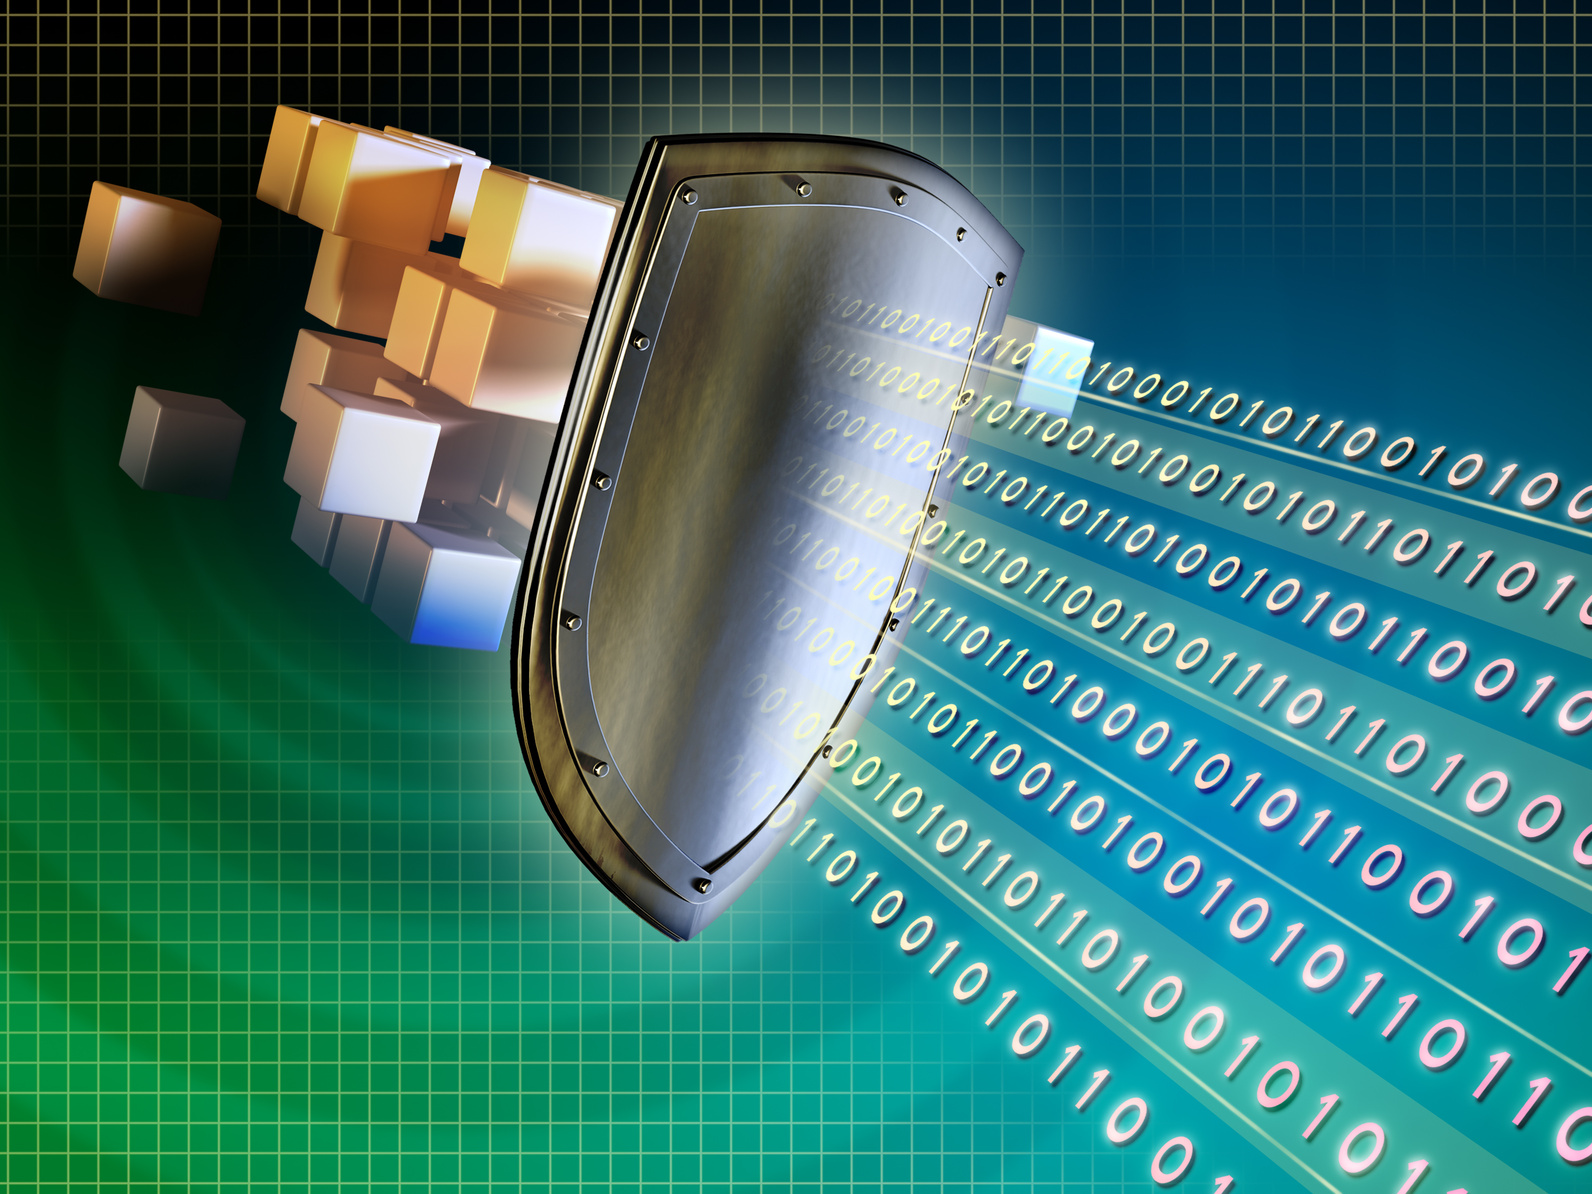 Metal shield protecting valuable data from external intrusions. Digital illustration.